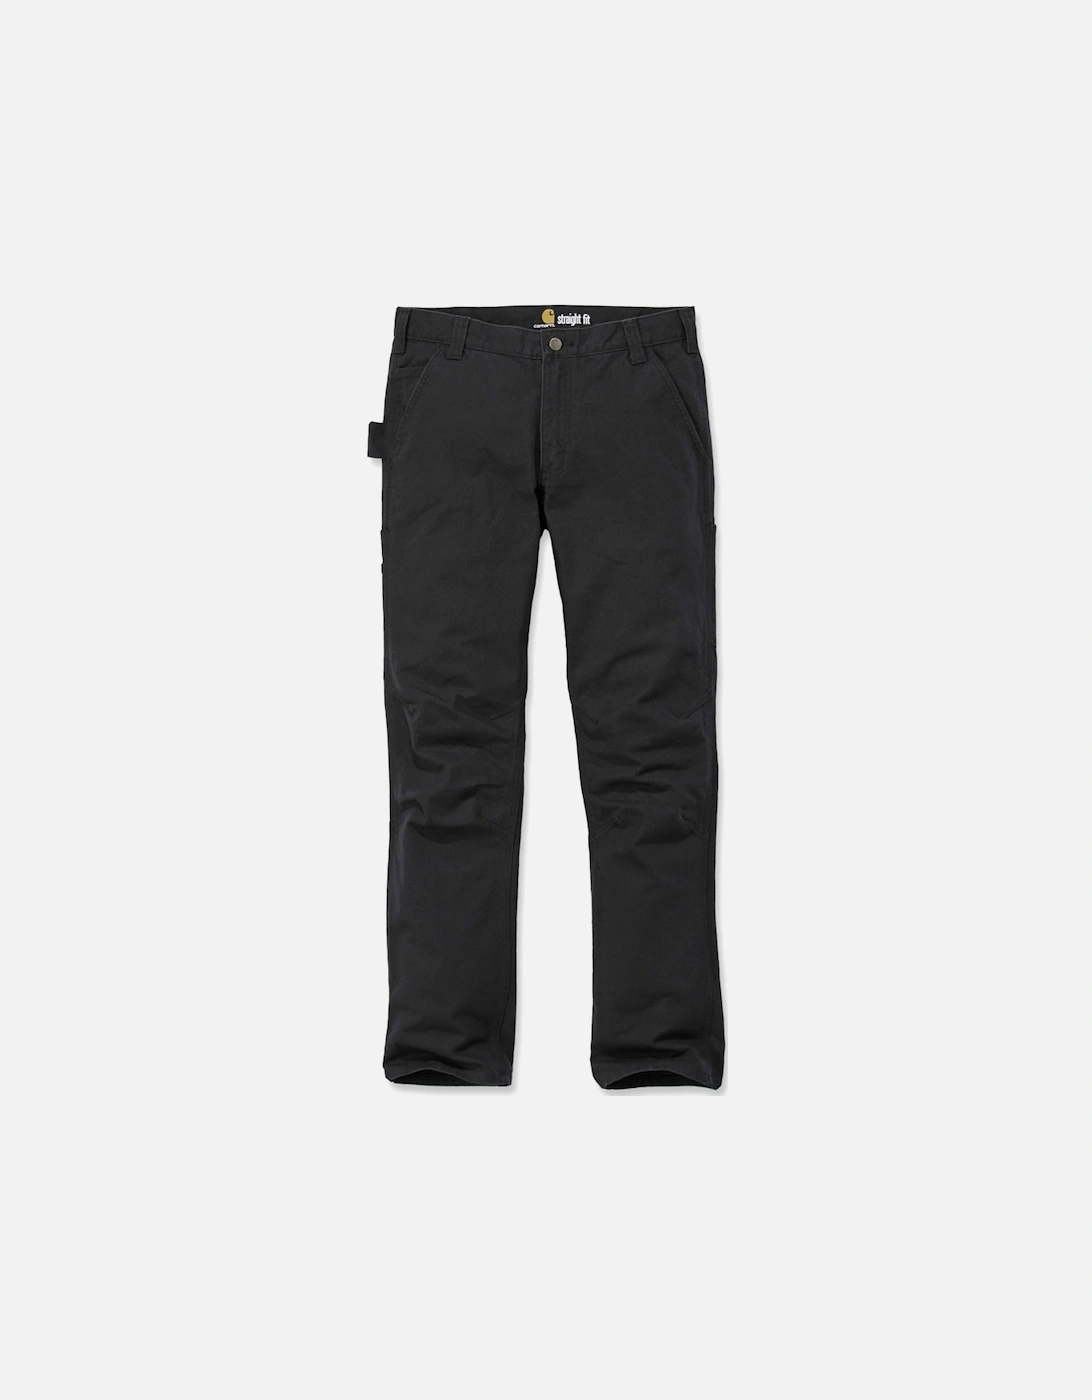 Carhartt Mens Stretch Duck Dungaree Rugged Chino Trousers